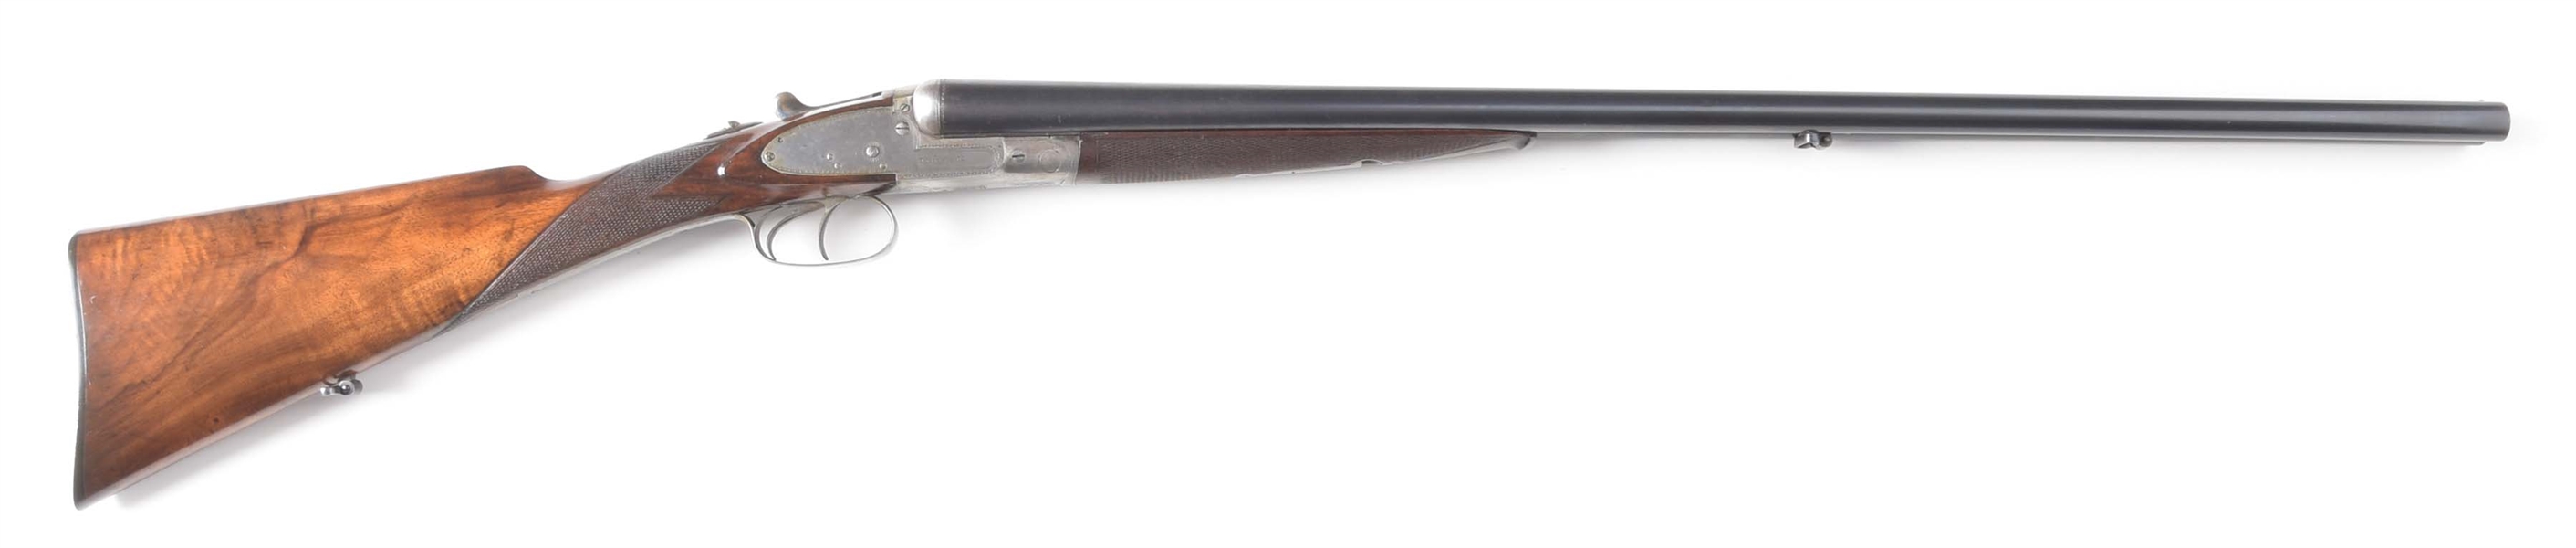 (C) TOLLEY AND CO. "THE TIMES" MODEL SIDE BY SIDE SHOTGUN.